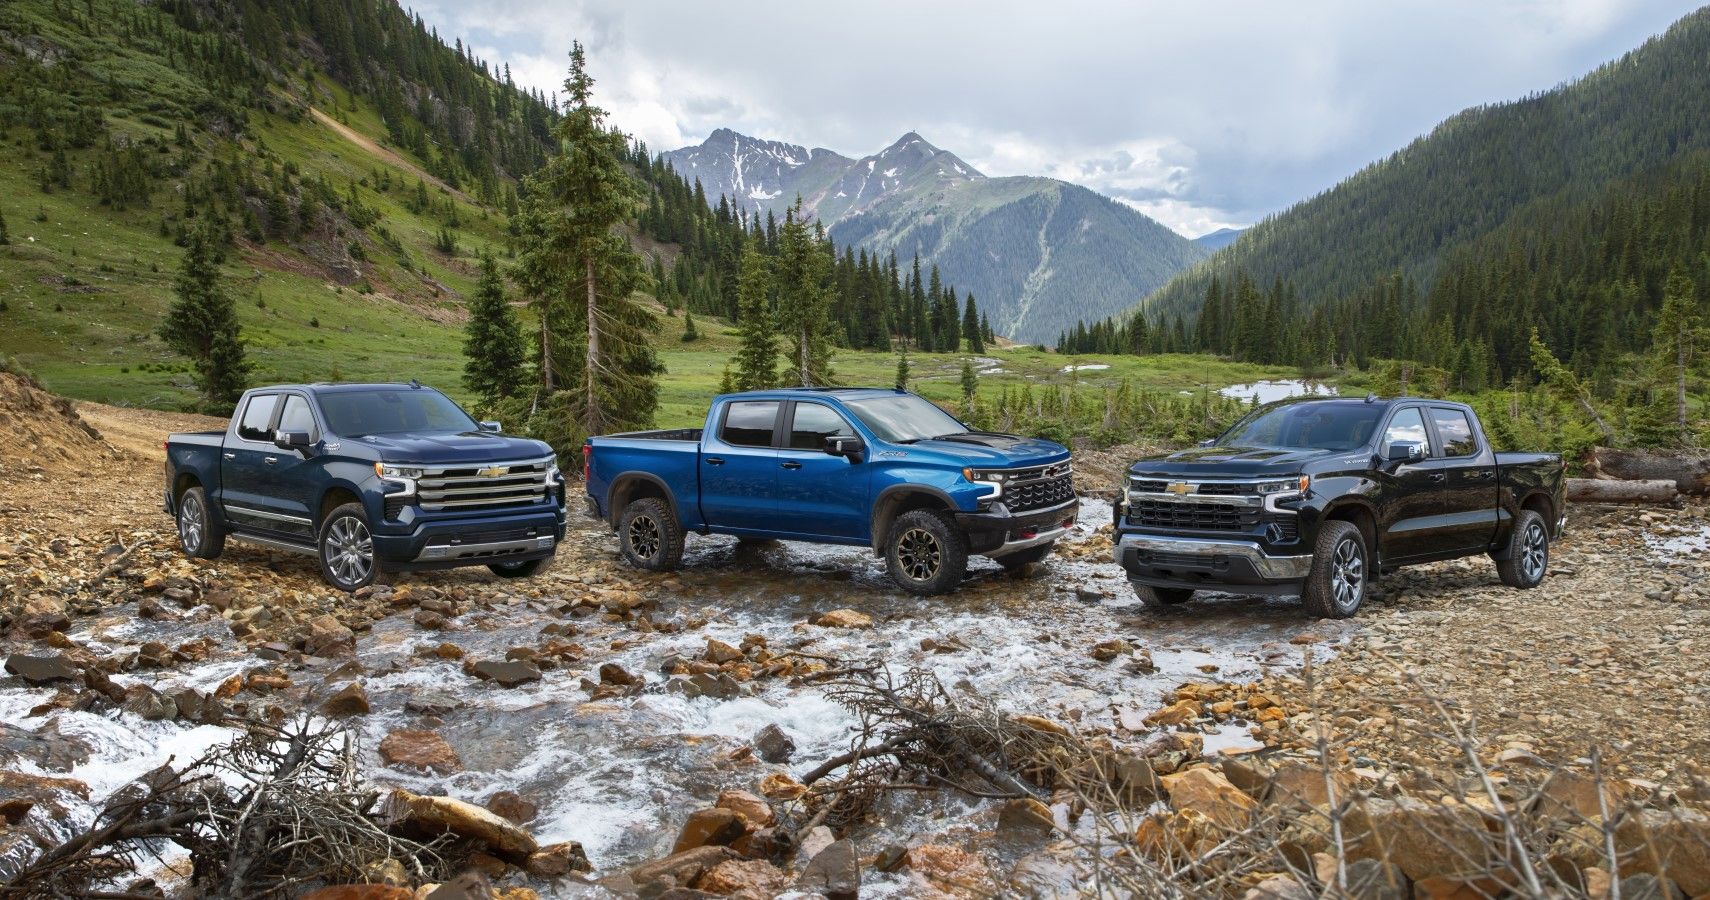 2022 Chevrolet Silverado is a versatile truck that gives a lot of choices to choose from